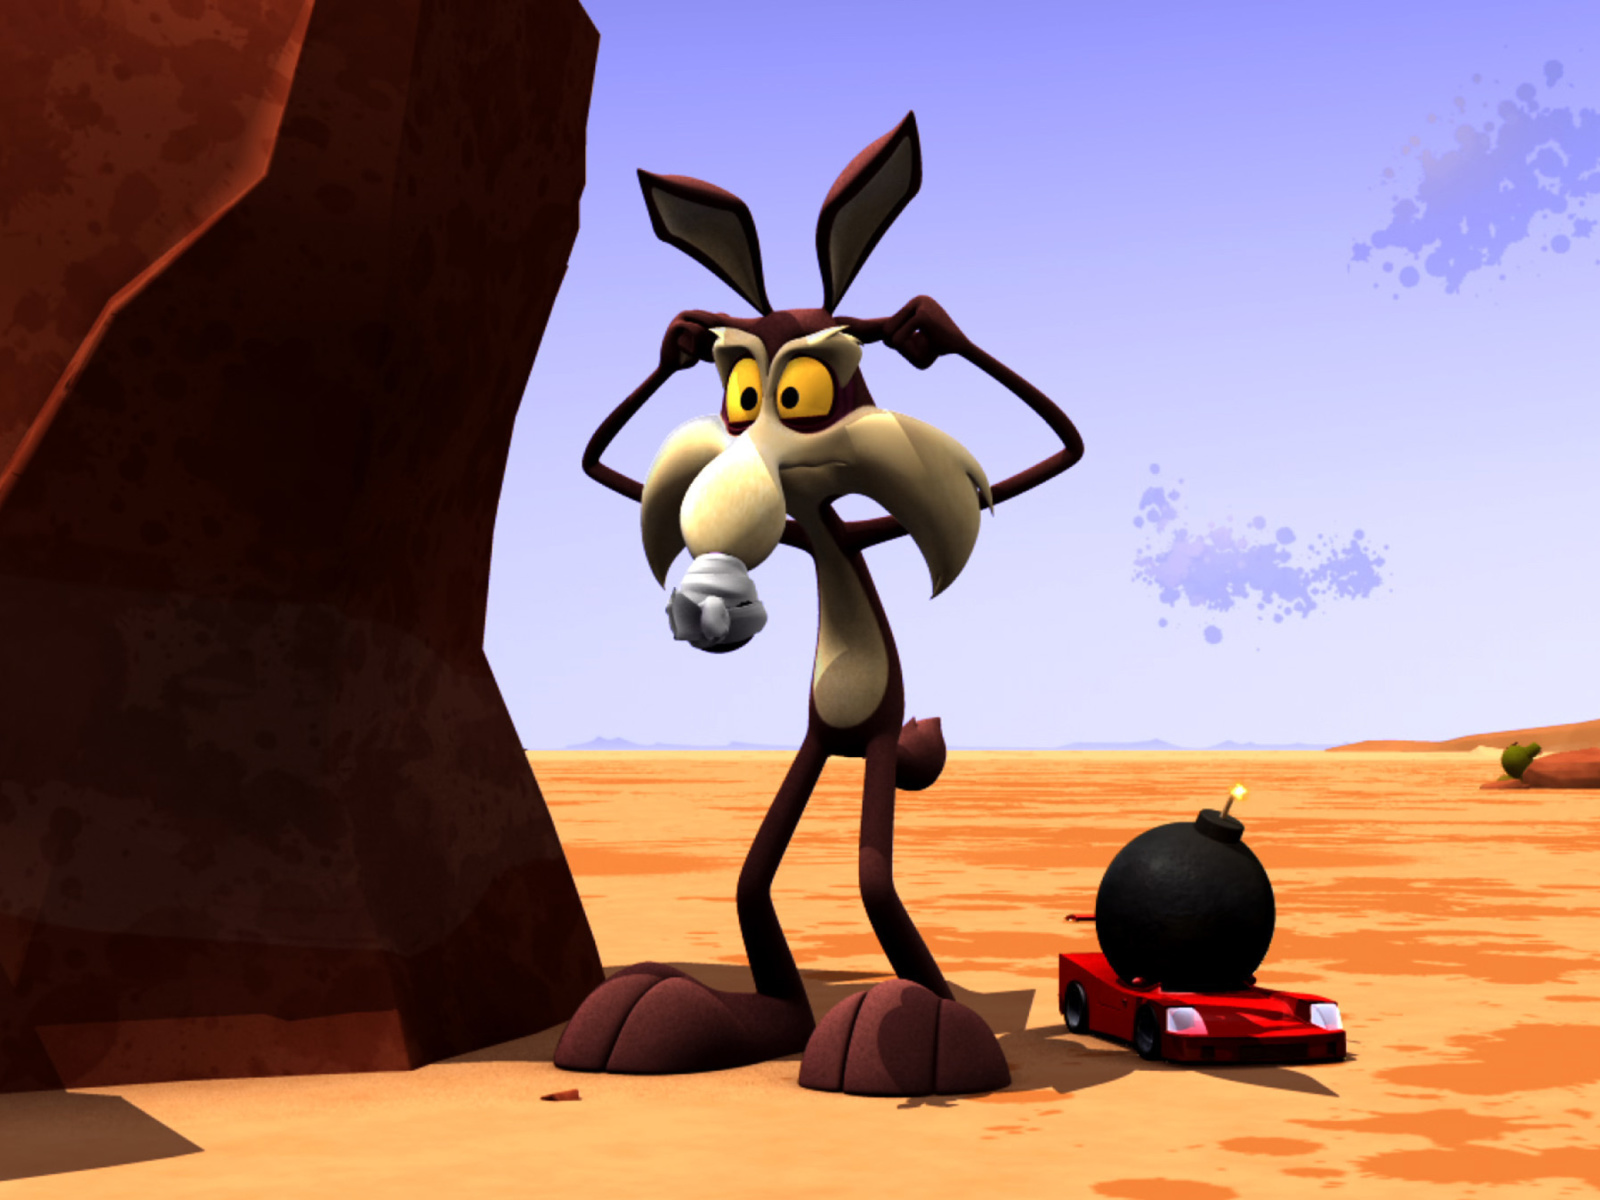 Das Wile E Coyote and Road Runner Wallpaper 1600x1200